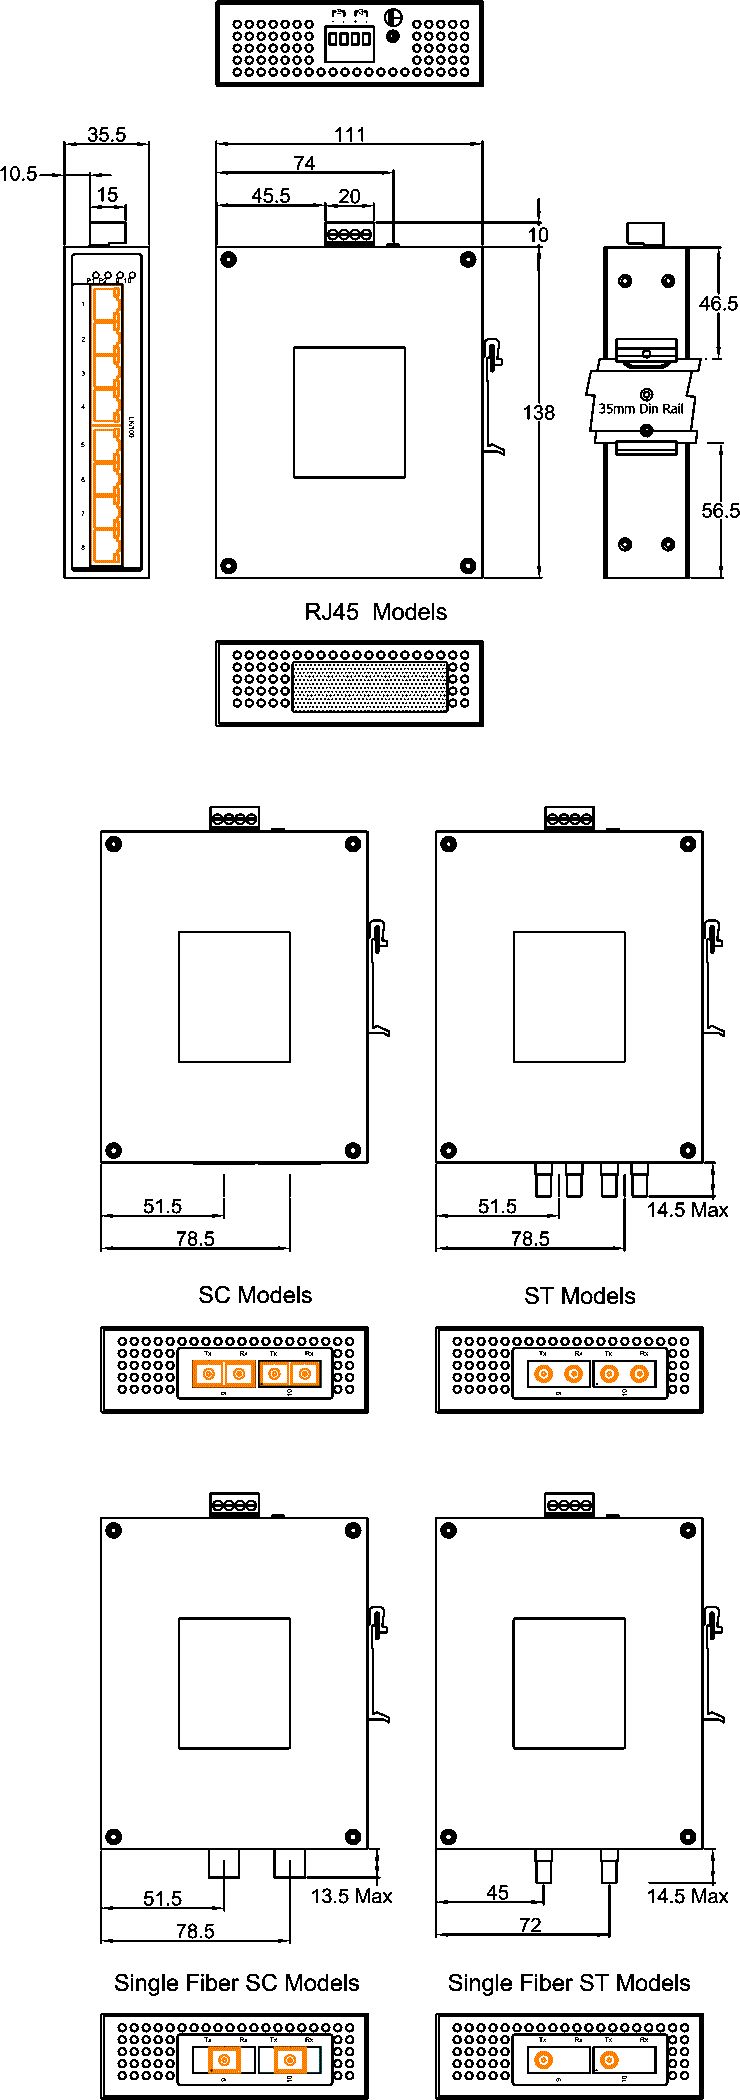 IDS-108F with Standard DIN Rail Mechanical Drawing